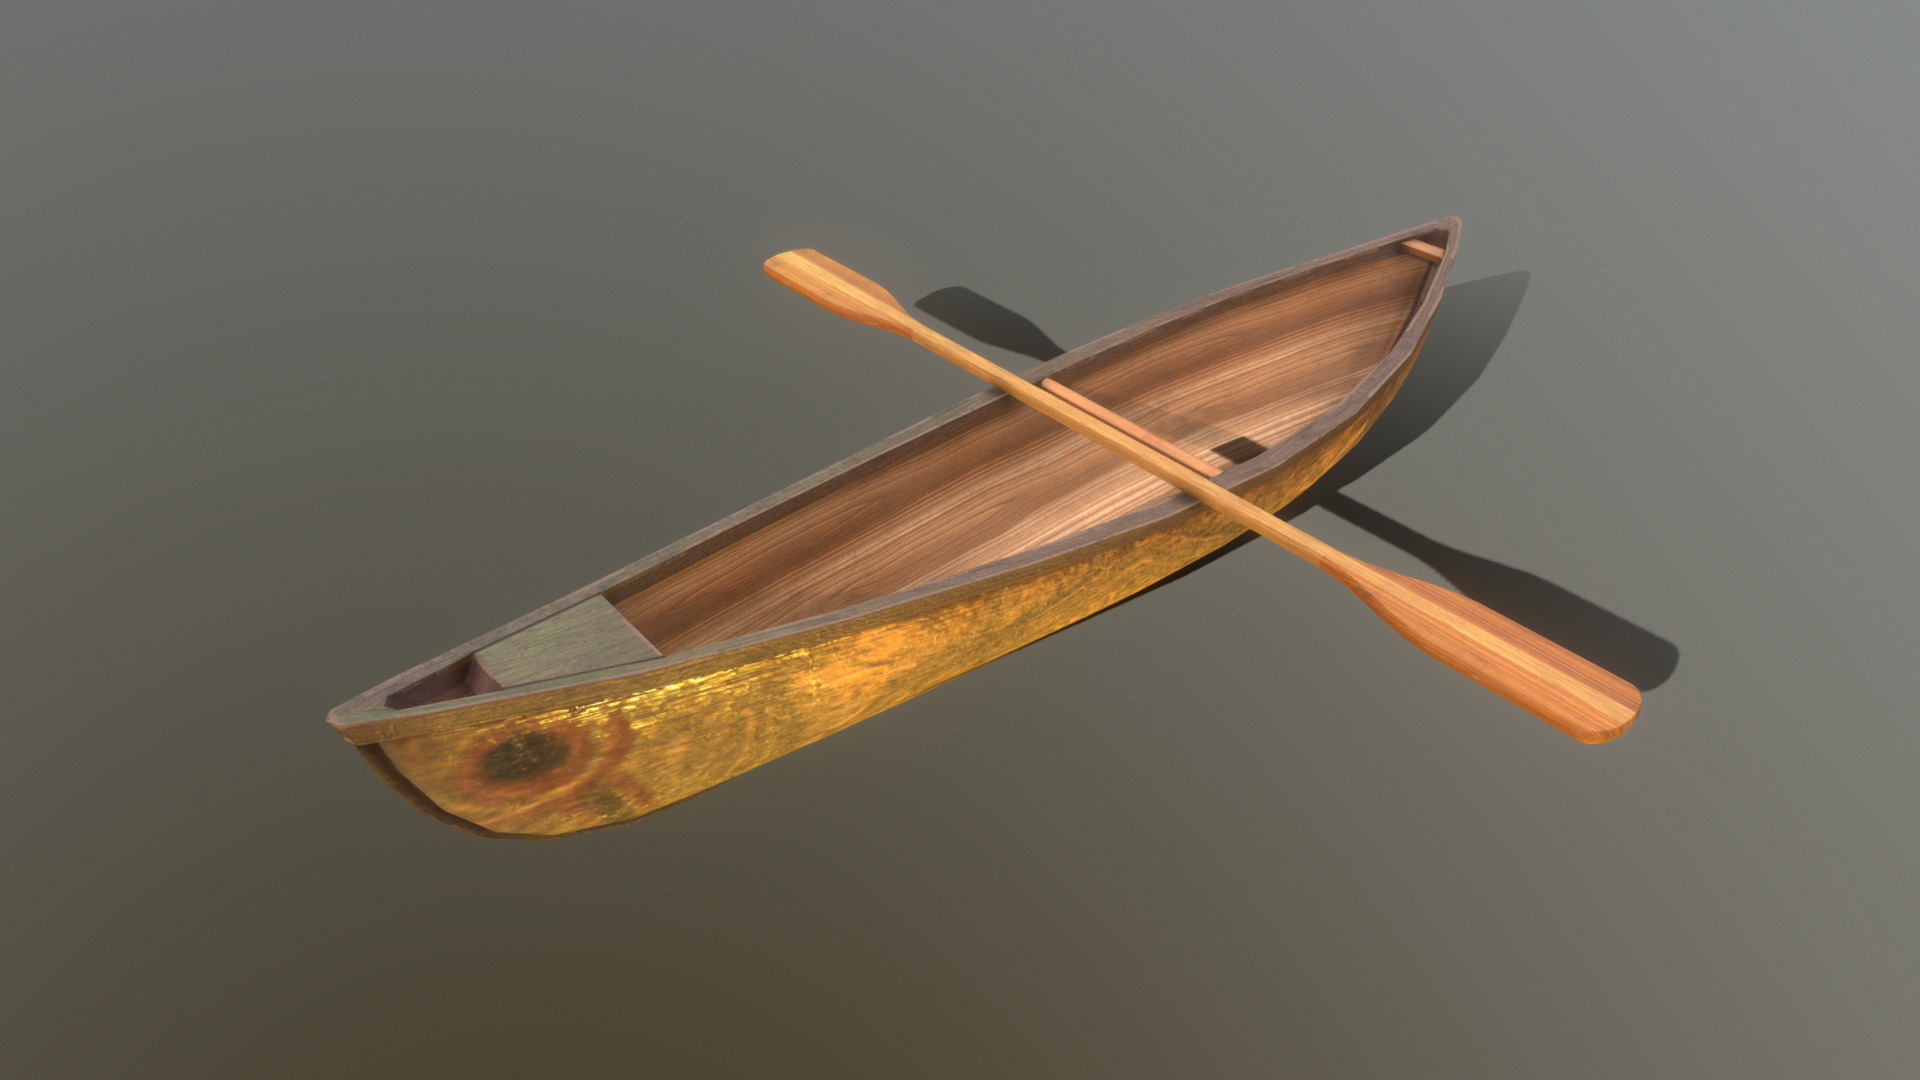 3D model HIE Ship D180409 - This is a 3D model of the HIE Ship D180409. The 3D model is about a wooden spoon with a handle.